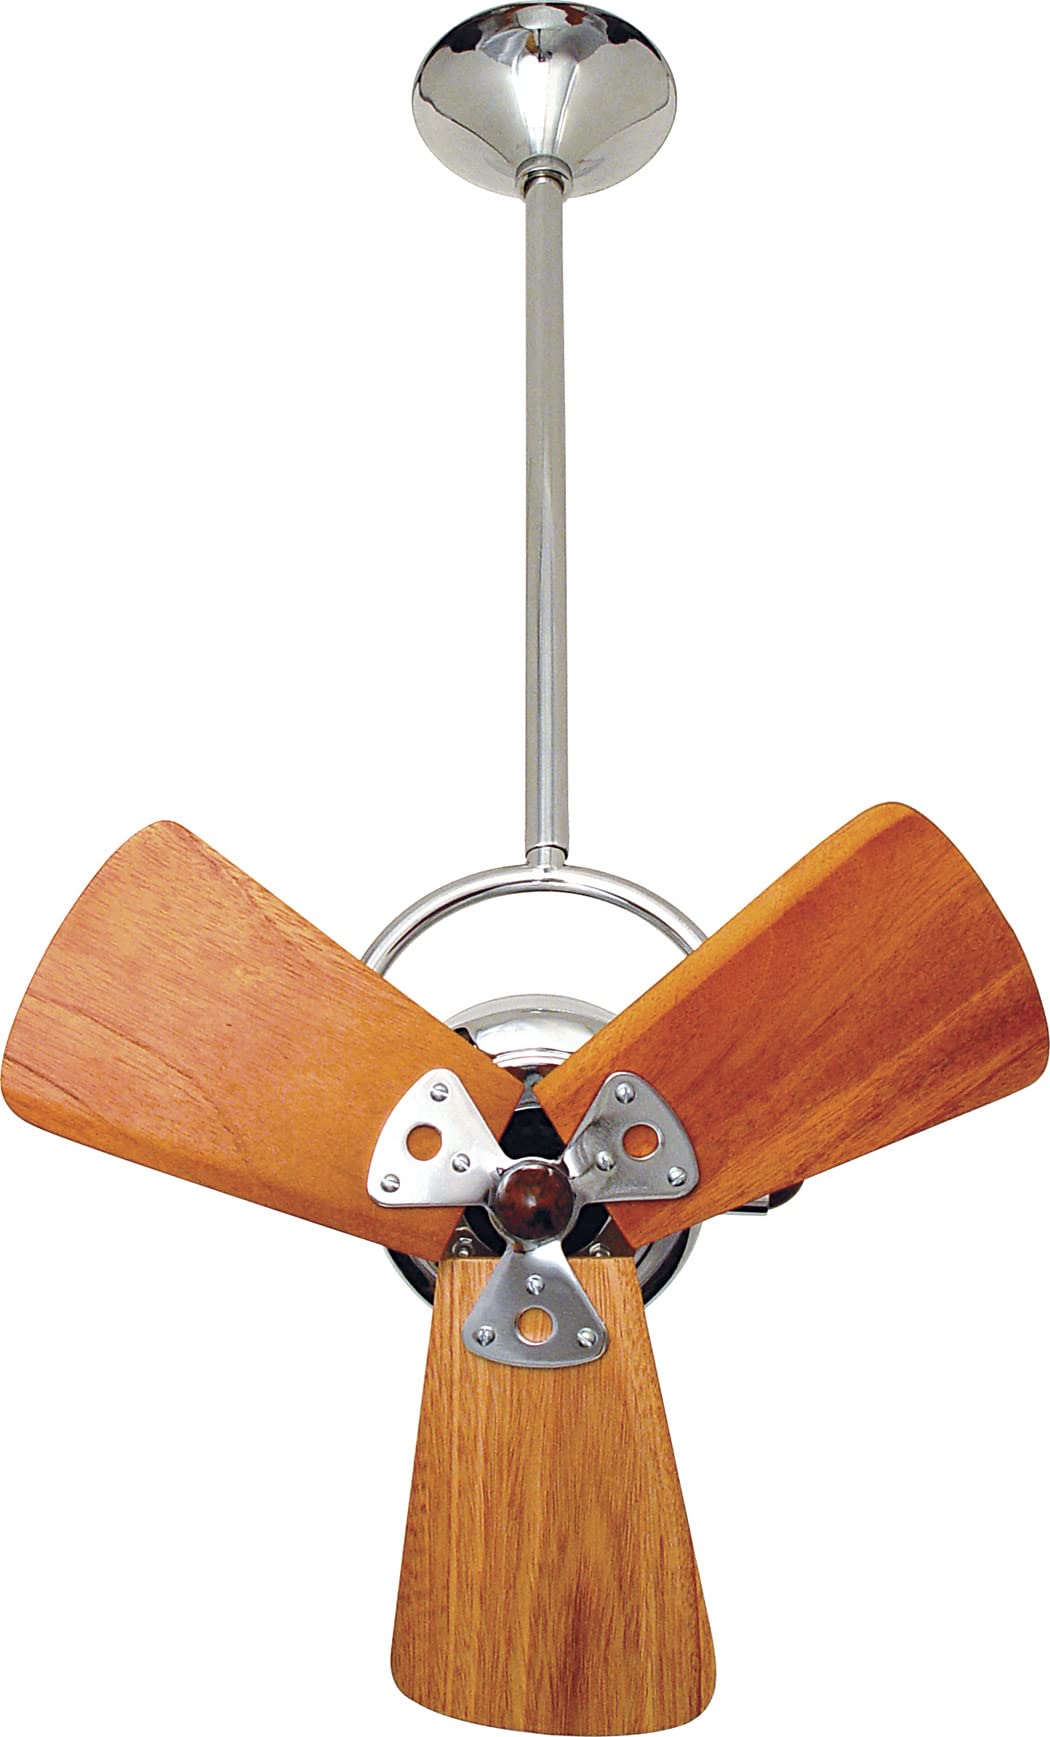 Matthews Fan BD-GOLD-WD Bianca Direcional ceiling fan in Ouro (Gold) finish with solid sustainable mahogany wood blades.